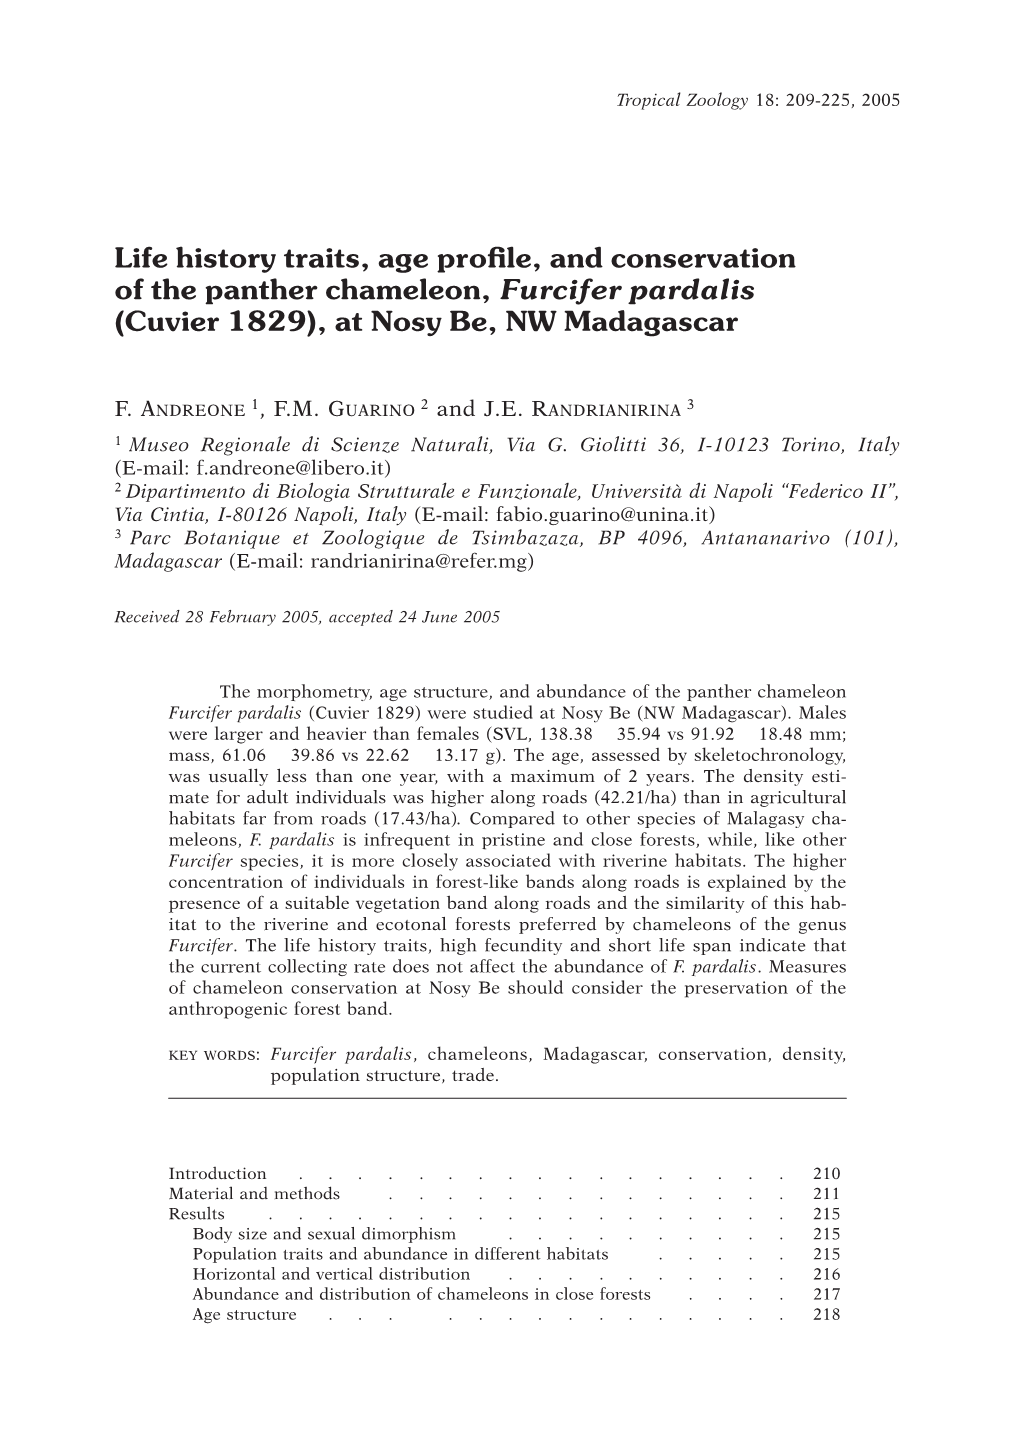 Life History Traits, Age Profile, and Conservation of the Panther